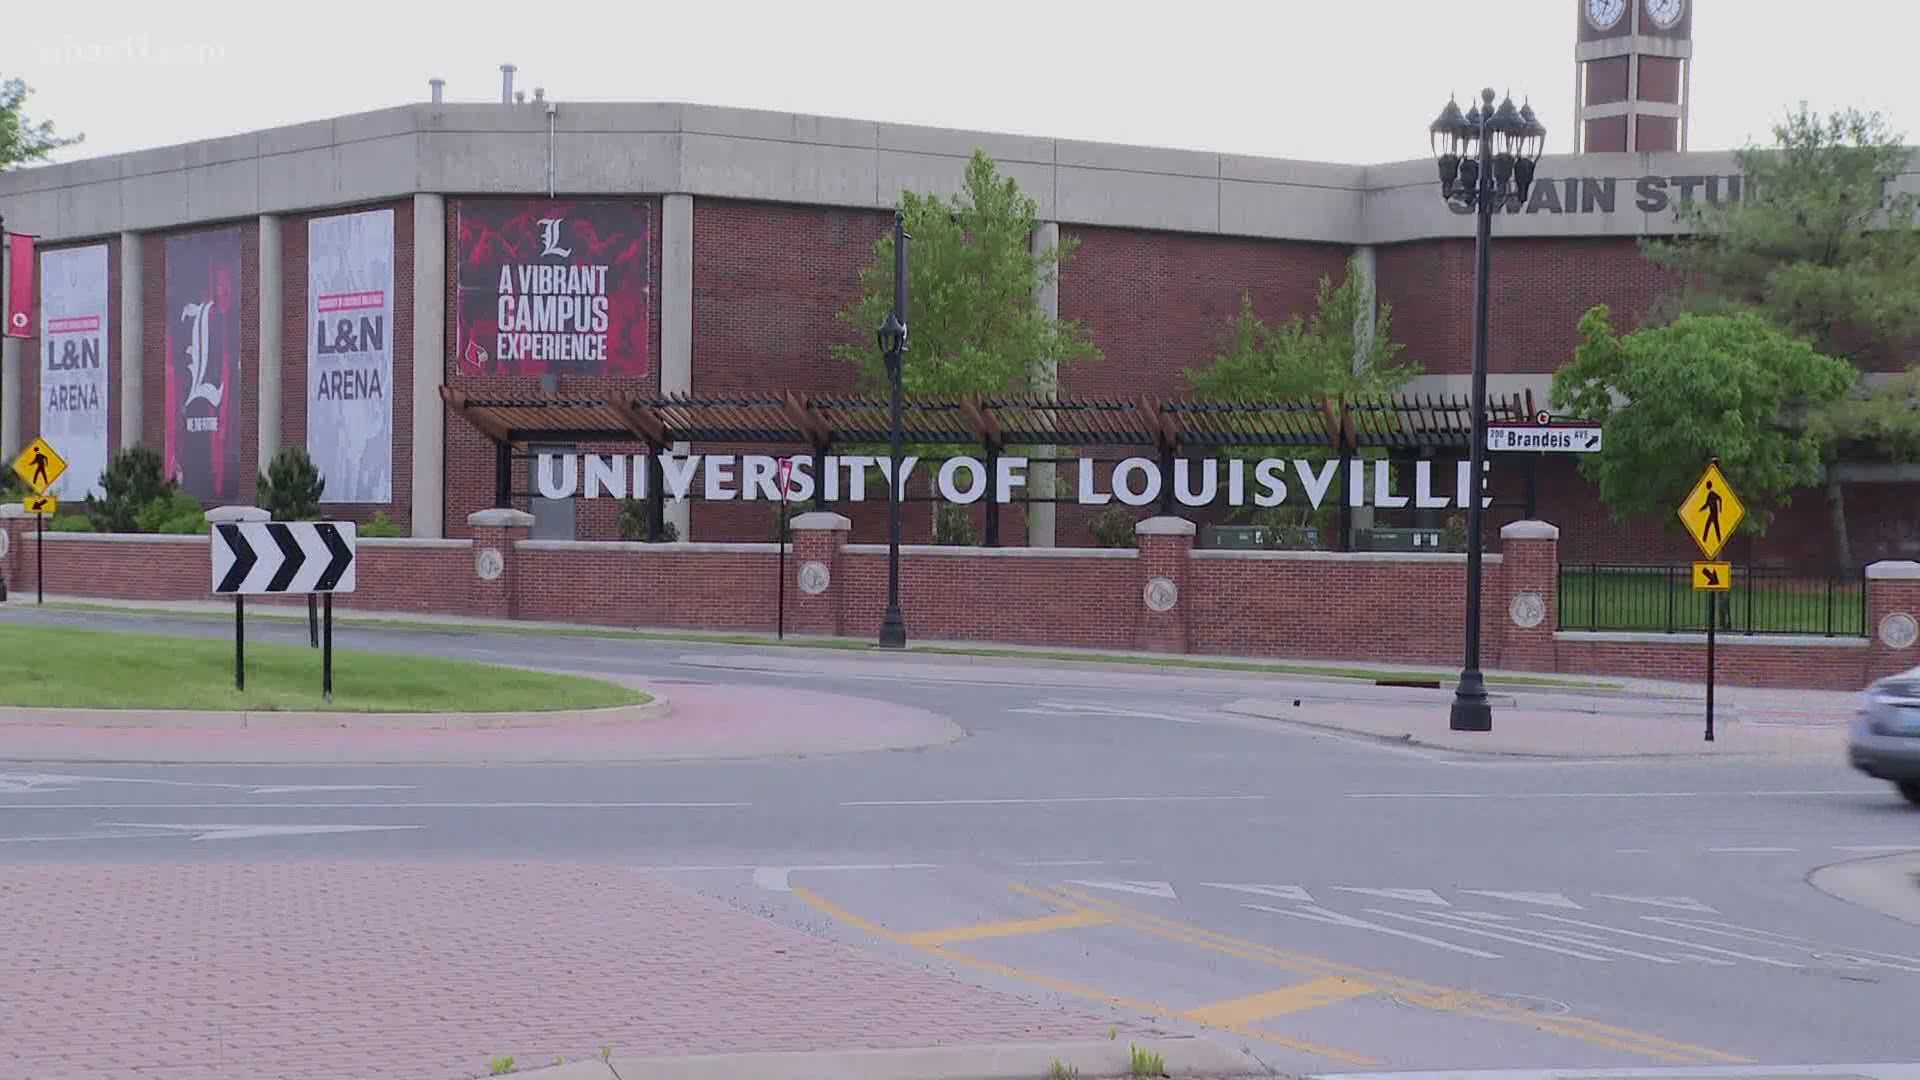 University of Louisville  Here and Beyond – The University of Louisville  is a public university in Louisville, Kentucky. It is a member of the  Kentucky state university system.